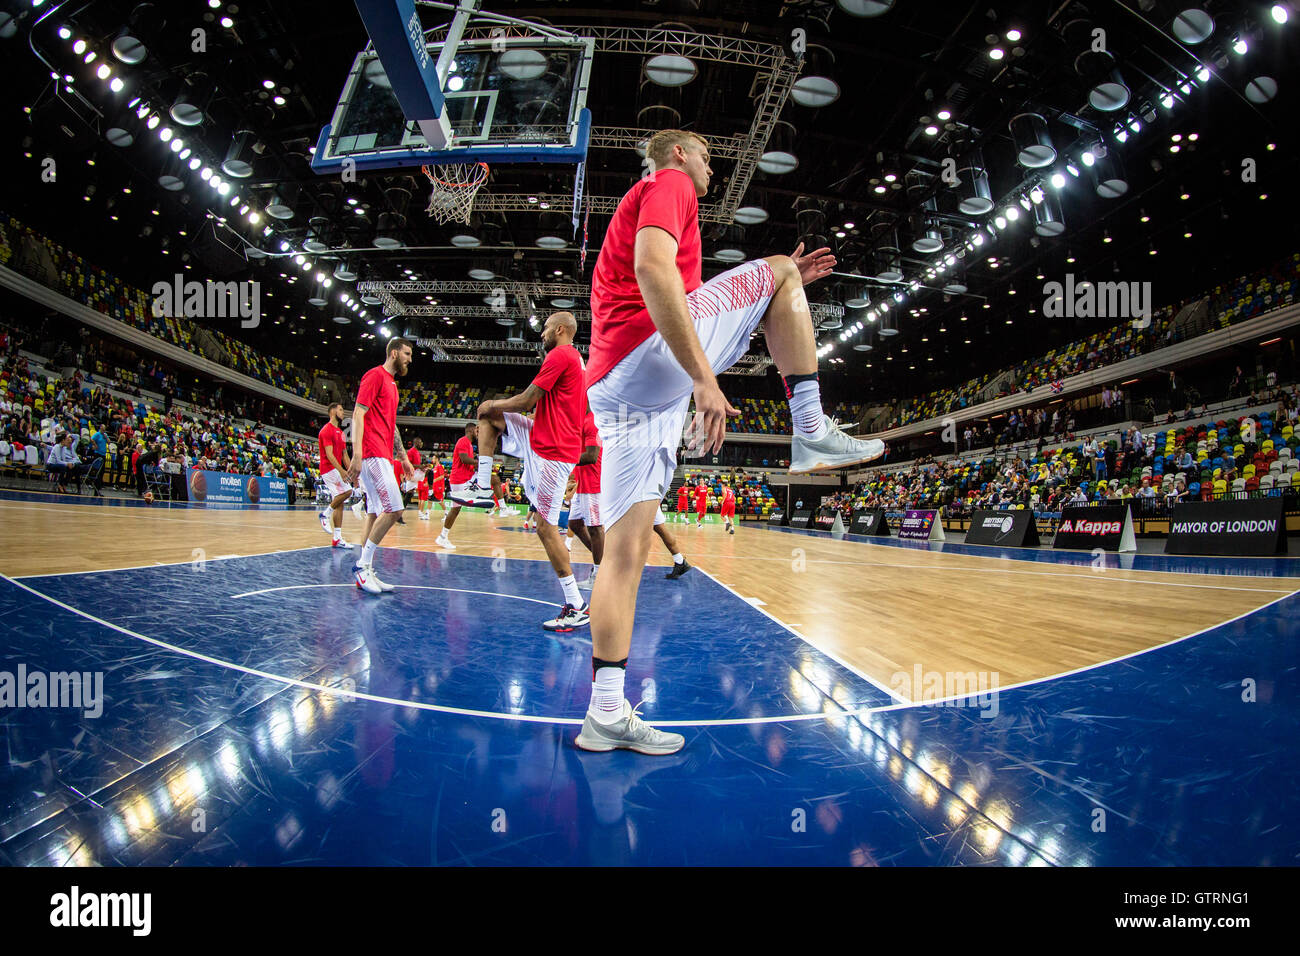 London, UK. 10th. September, 2016.  Team GB warm up before the match. Team GB play Hungary in Eurobasket 2017 qualifiers at Copper Box, Olympic Park, London, UK. copyright Carol Moir/Alamy Live News. Stock Photo